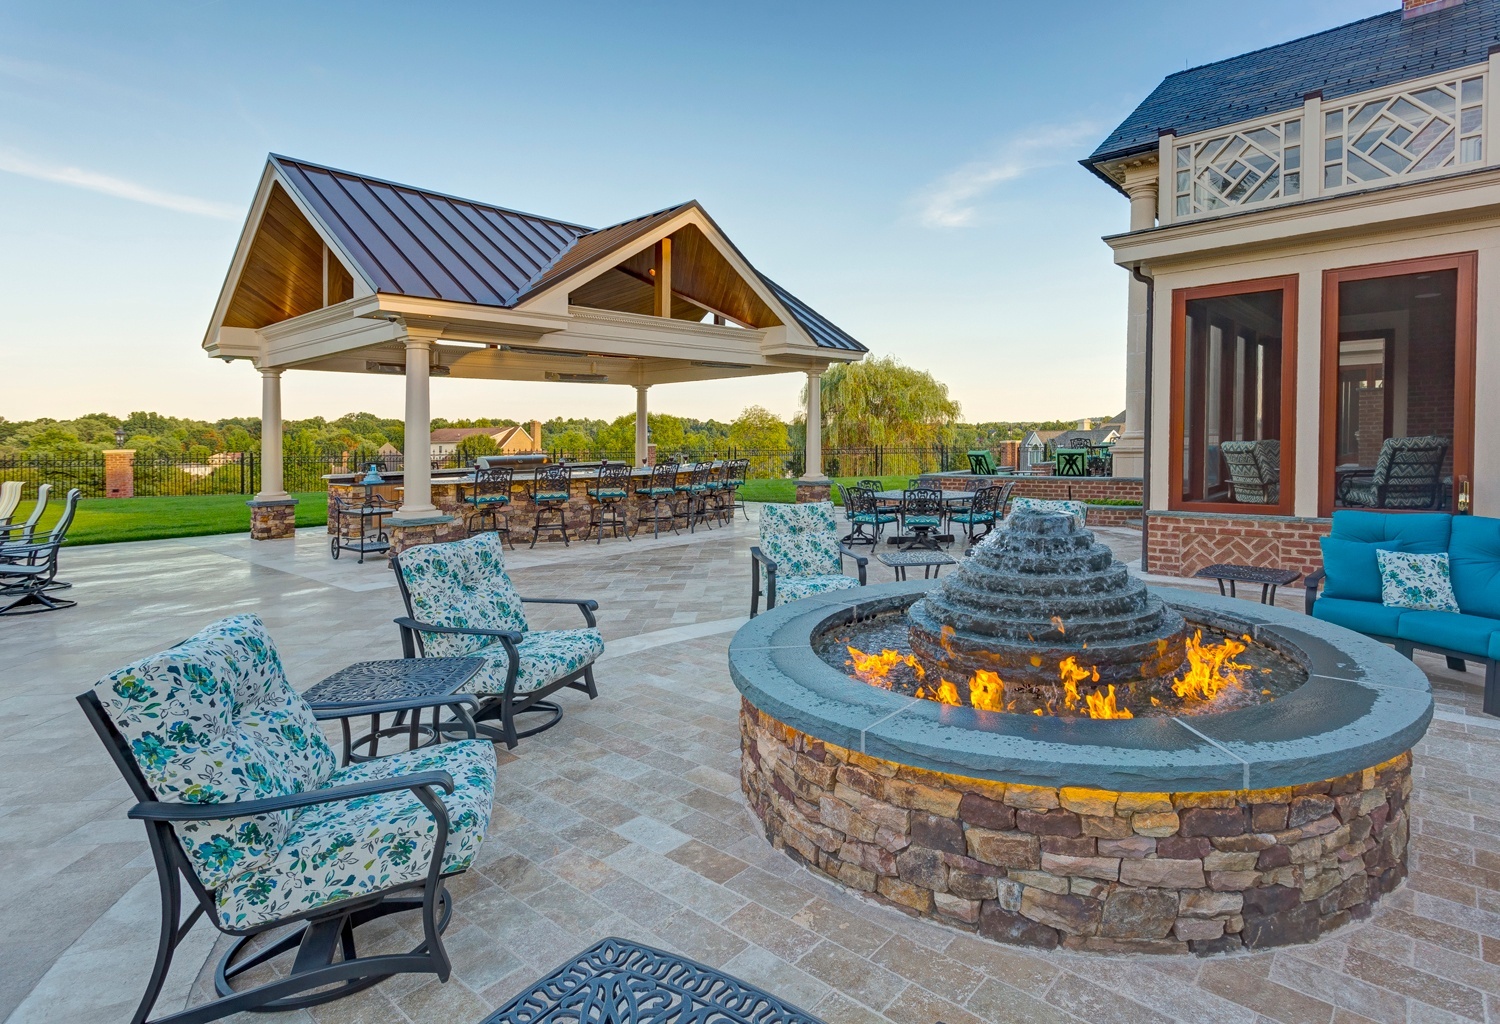 Patio fire pit fountain & dining area